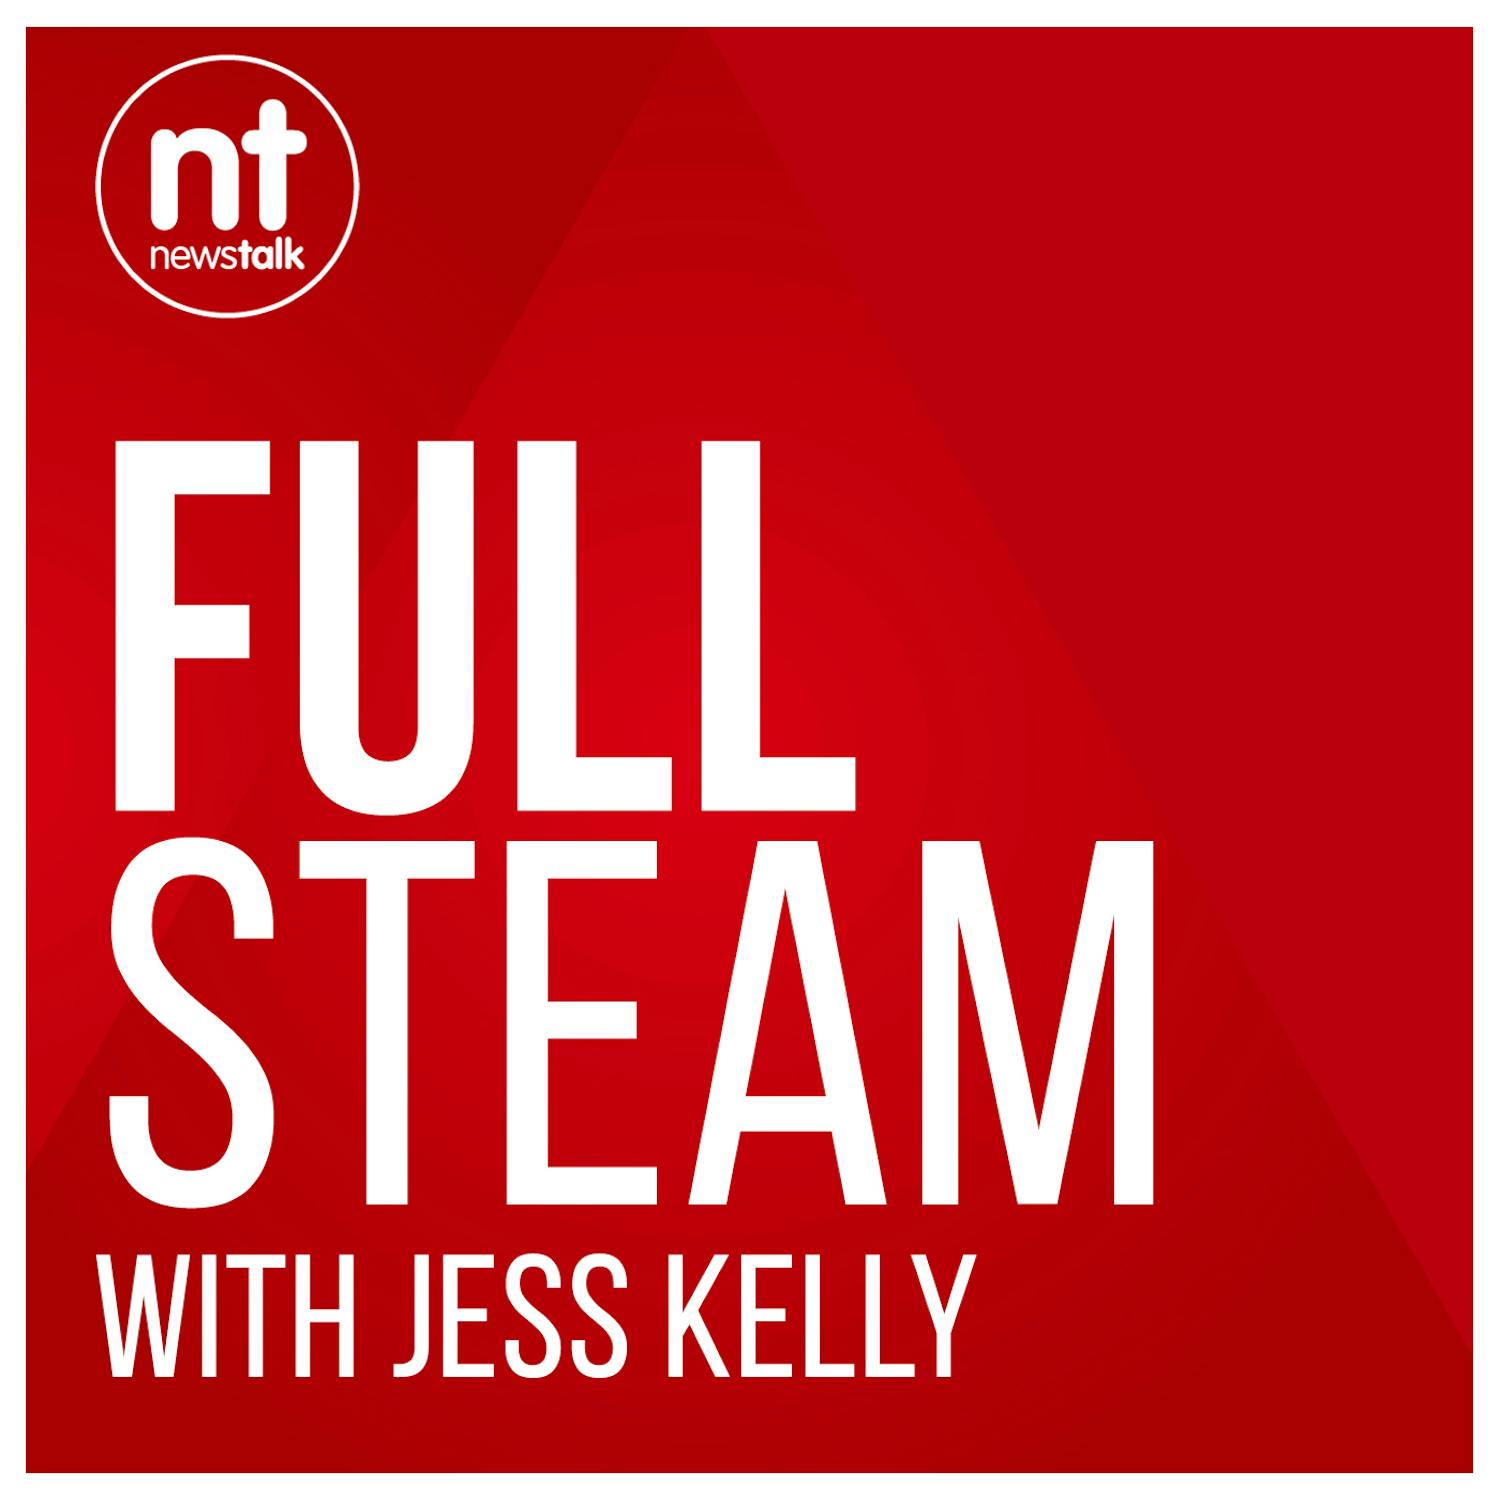 Full STEAM with Jess Kelly: Helen Dixon, Data Protection Commissioner